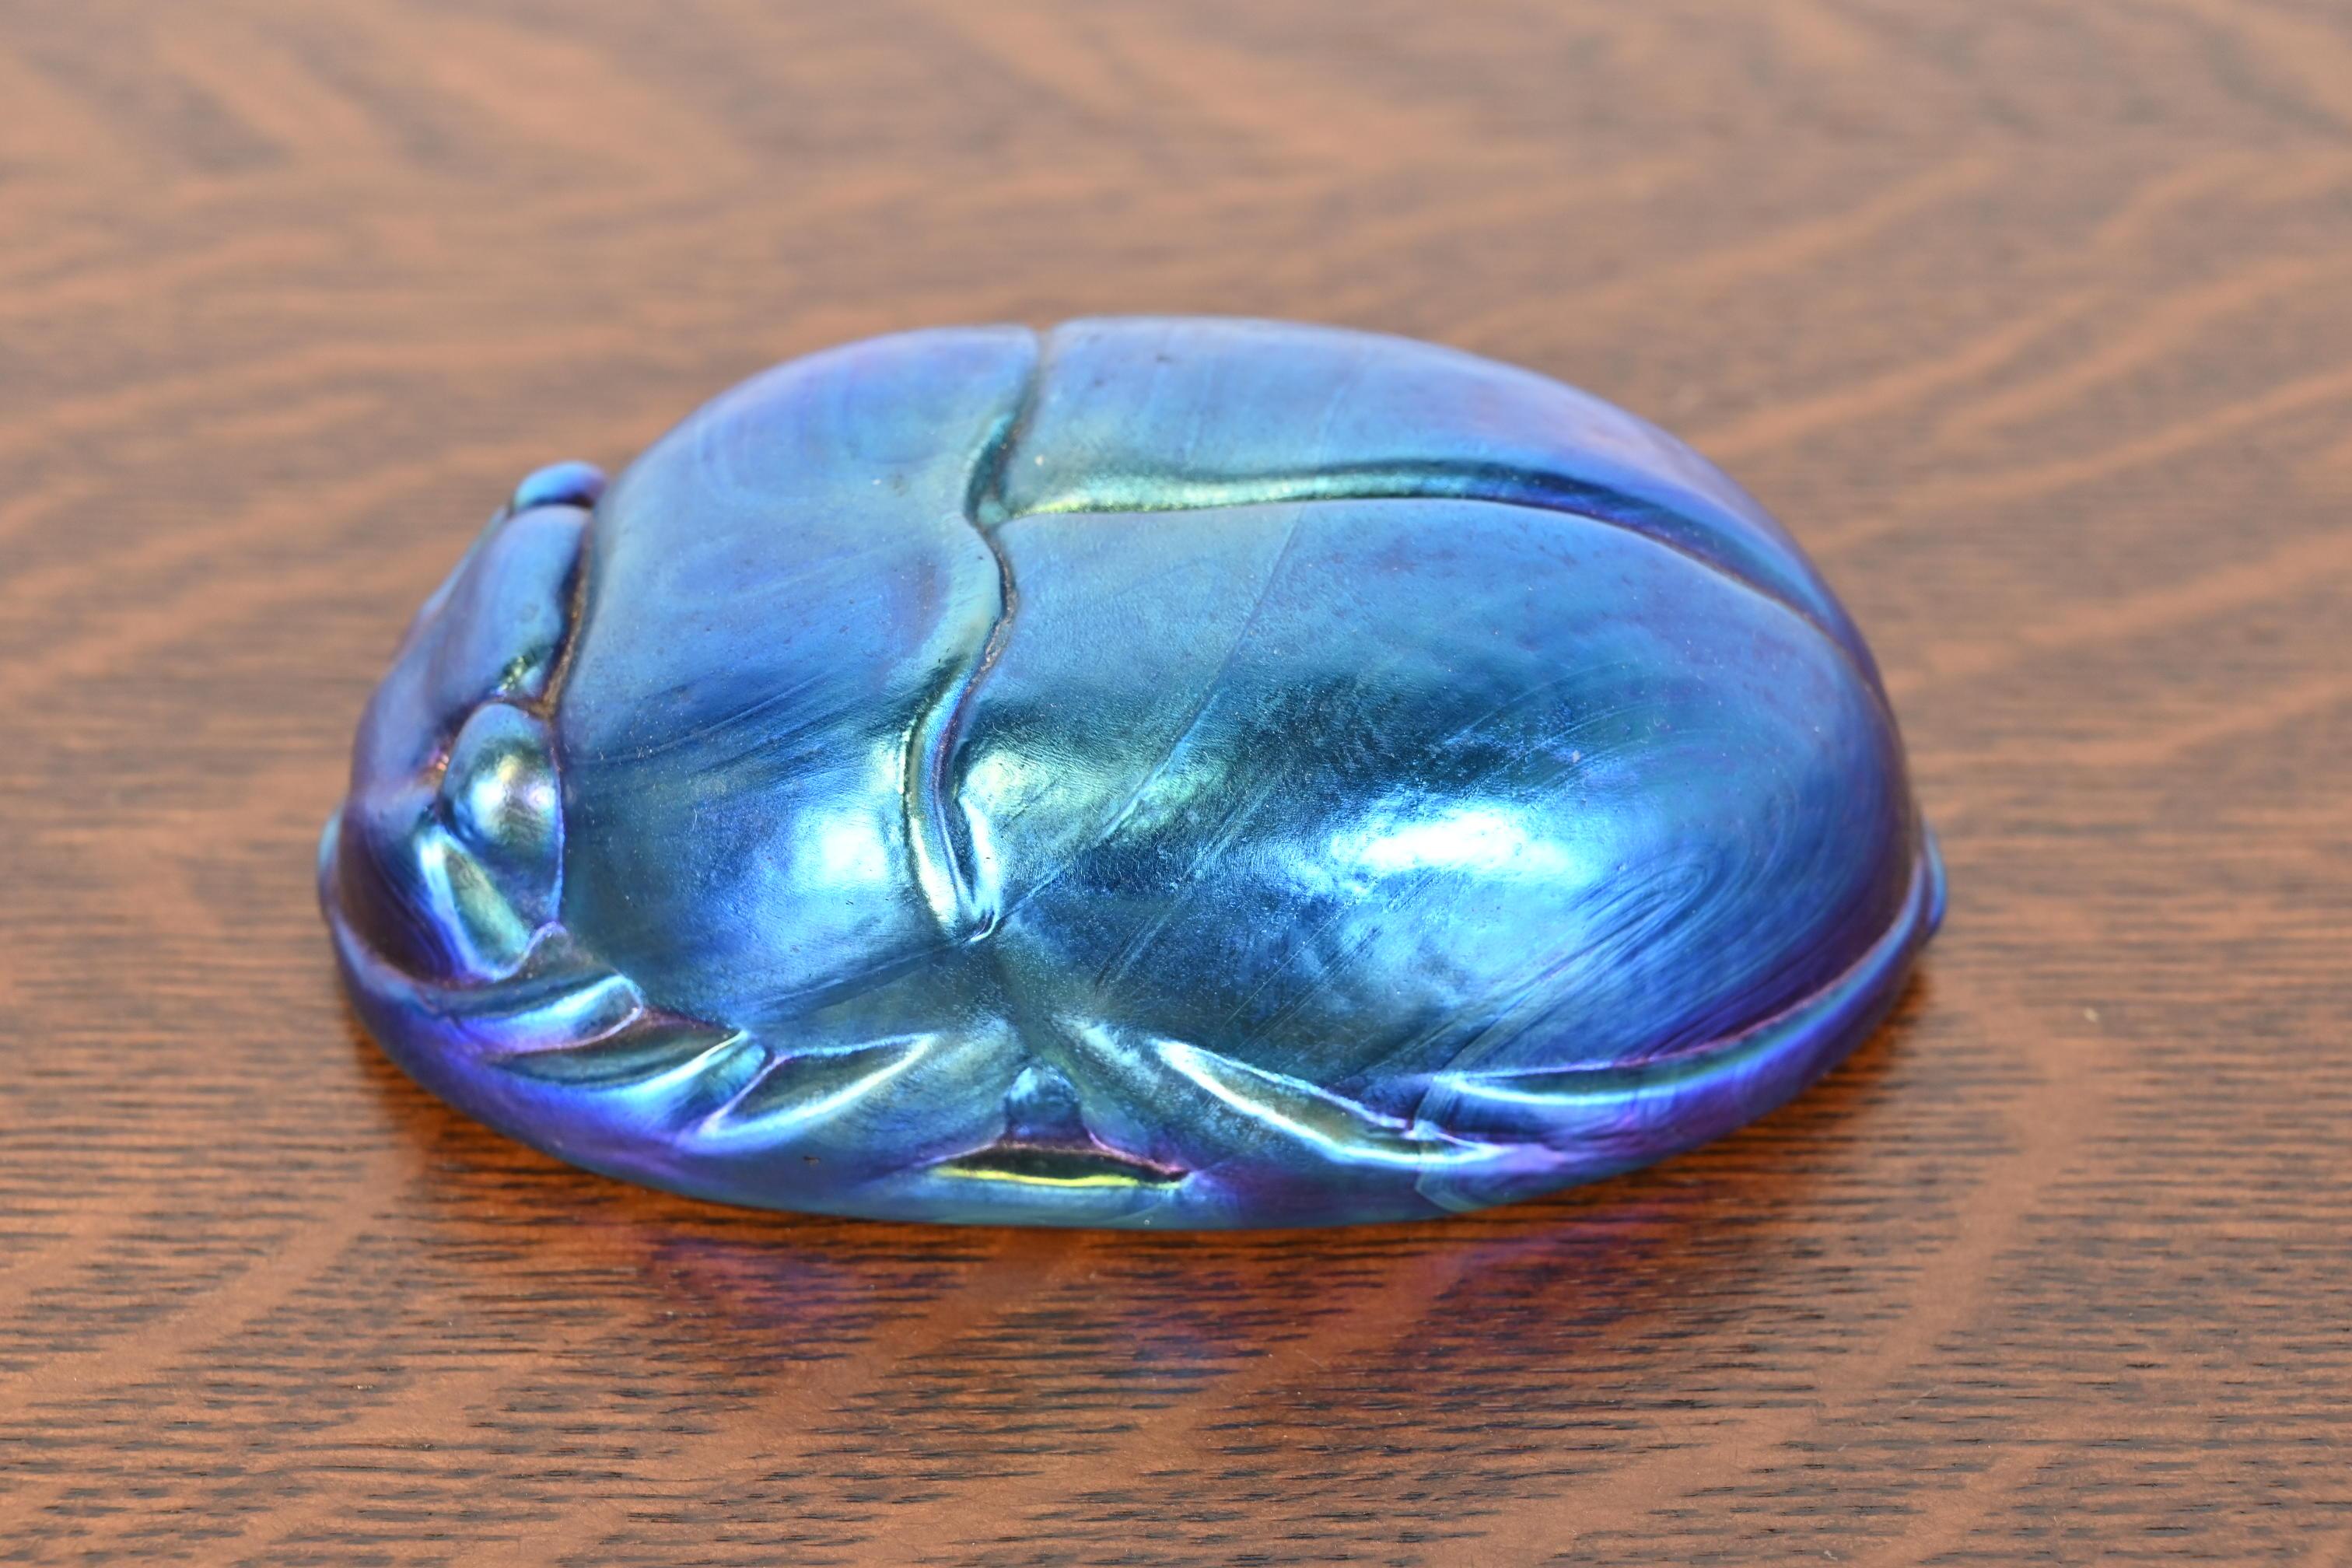 Tiffany Studios Style Iridescent Favrile Glass Scarab Paperweight For Sale 3